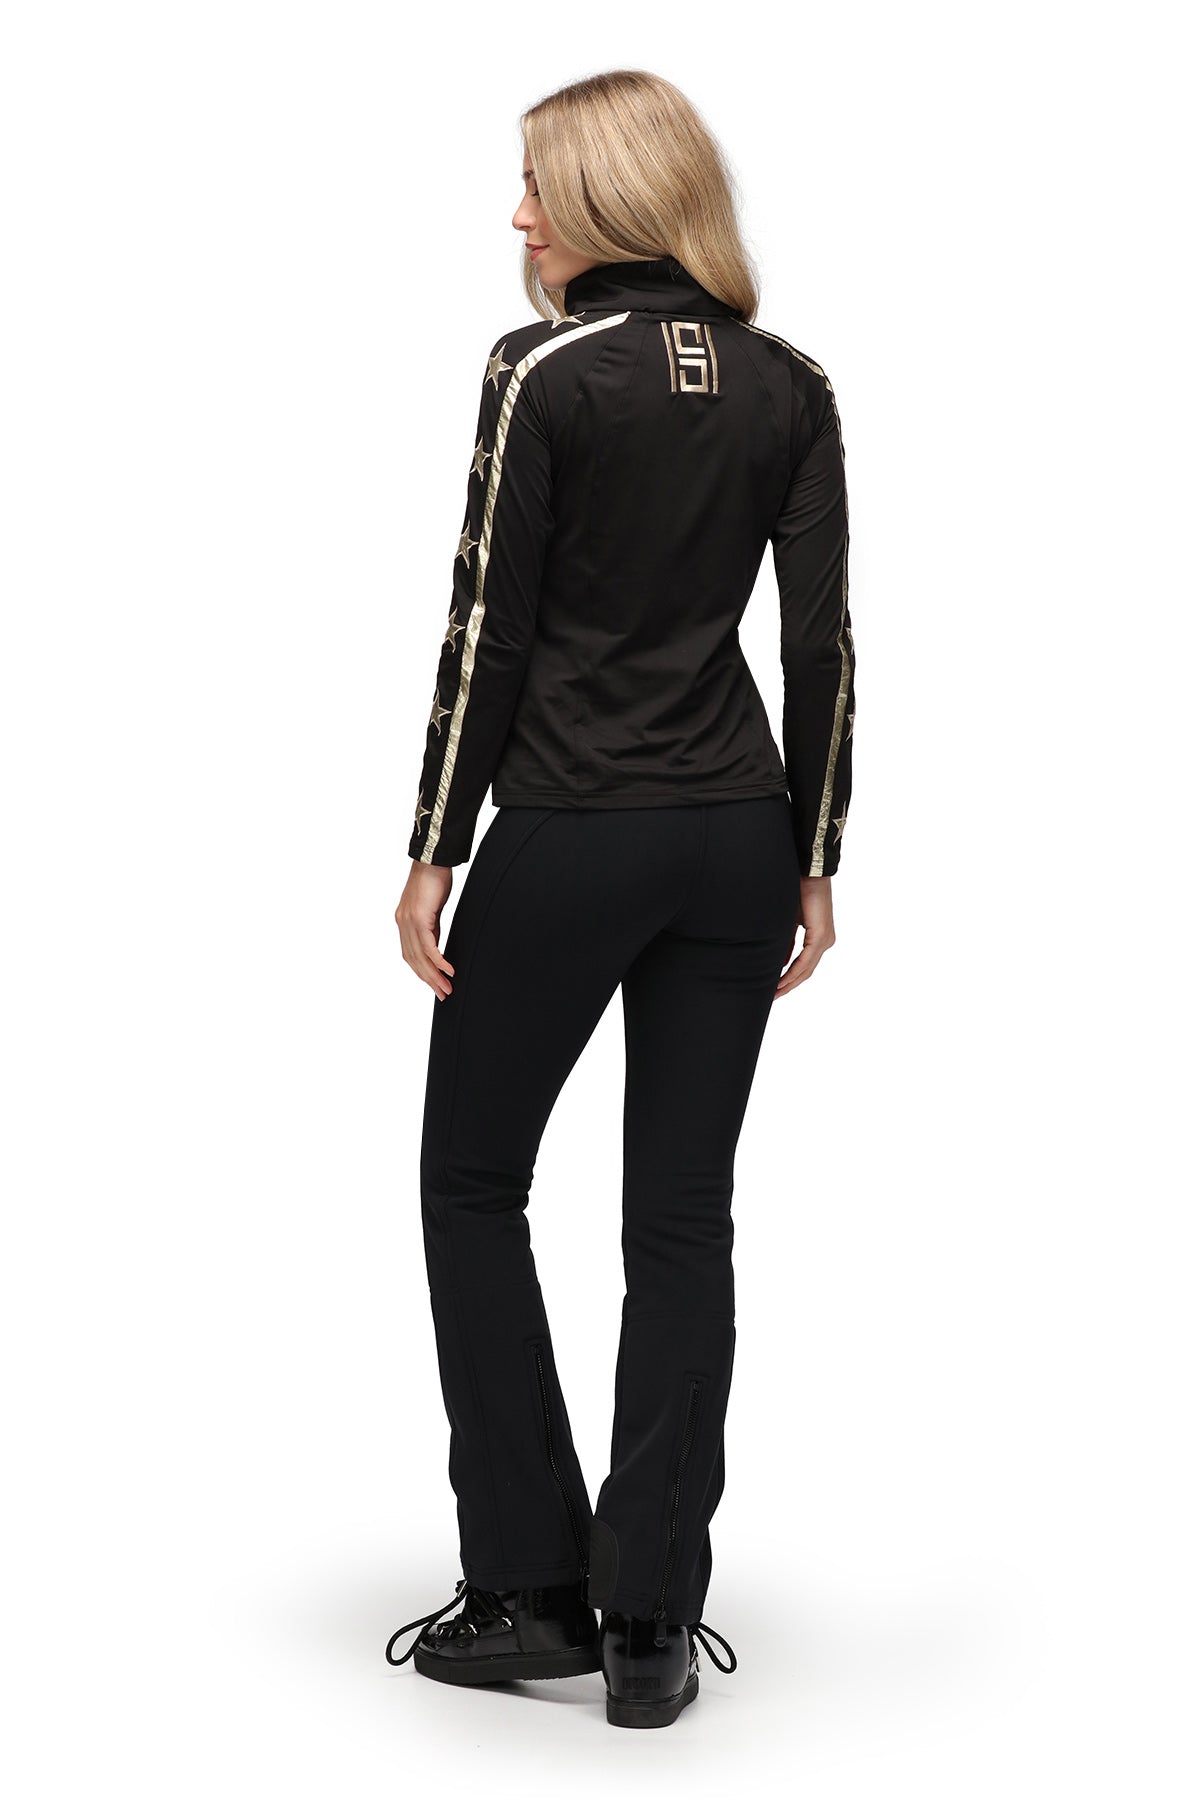 High Society Whitney Base Layer in Black and Gold